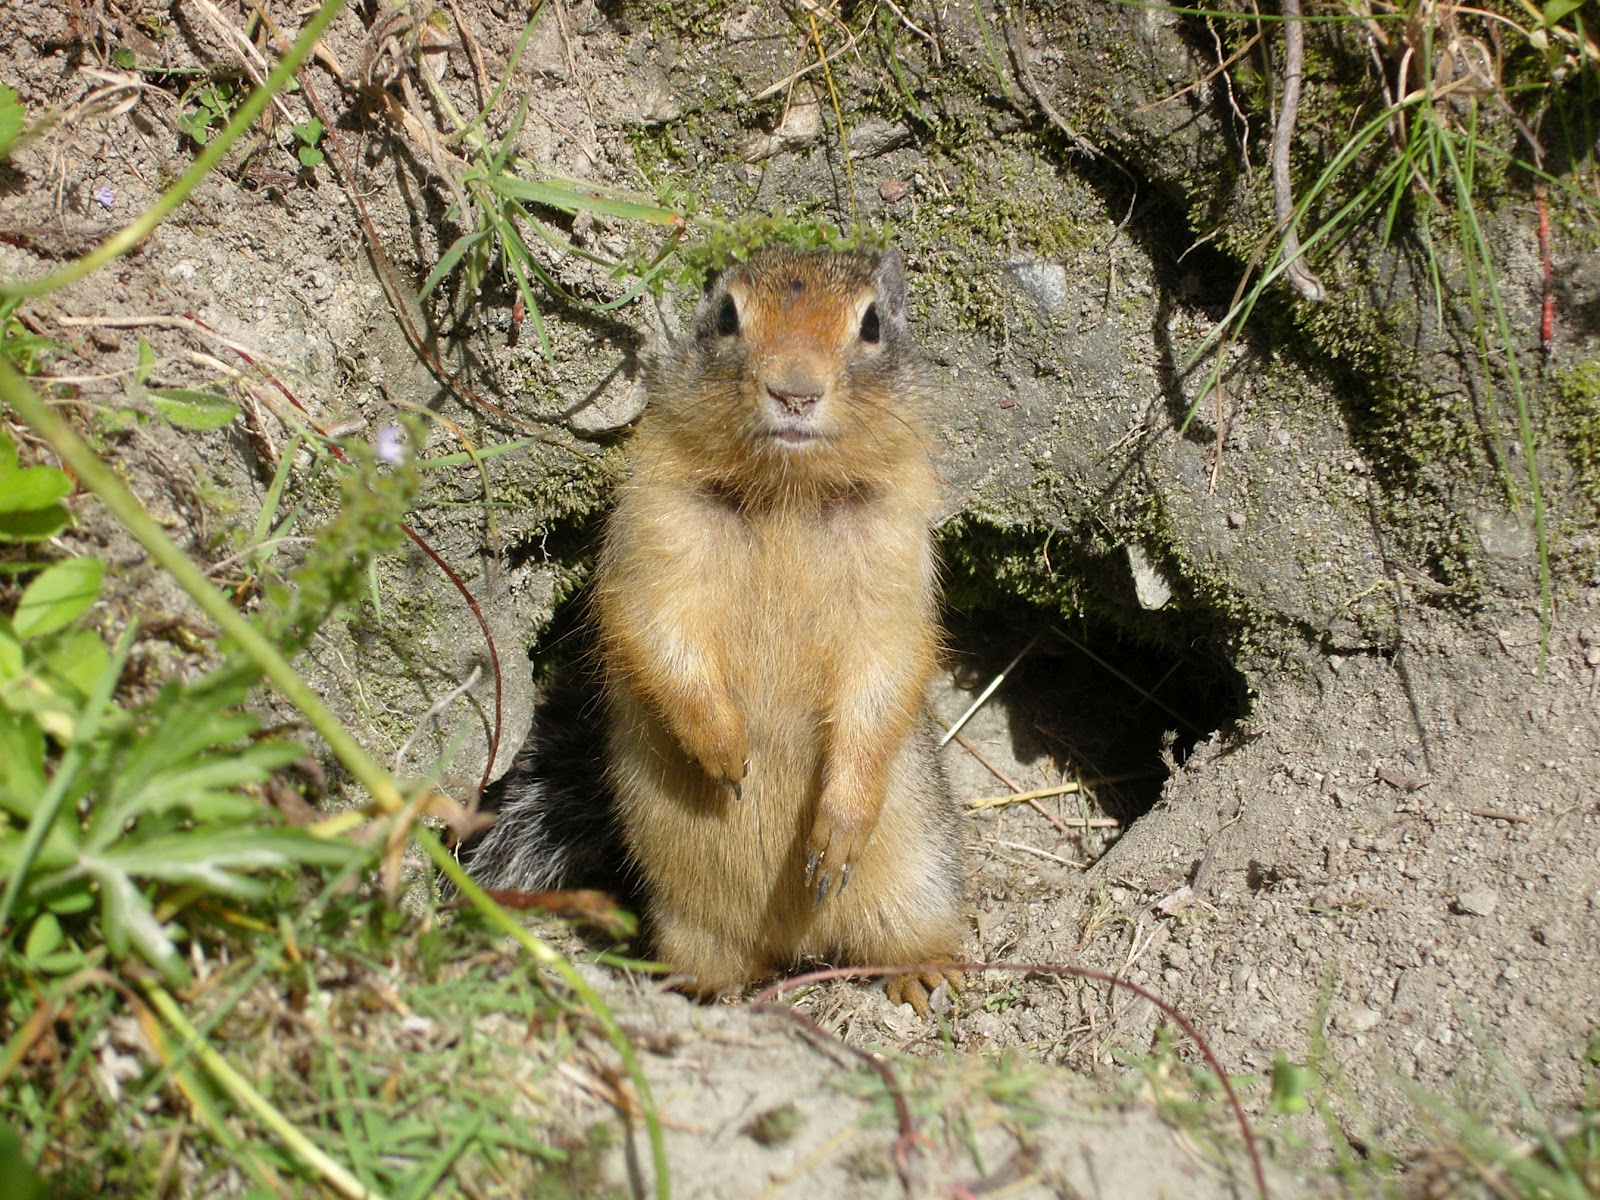 The News For Squirrels: Climate Change and the Columbian Ground Squirrel